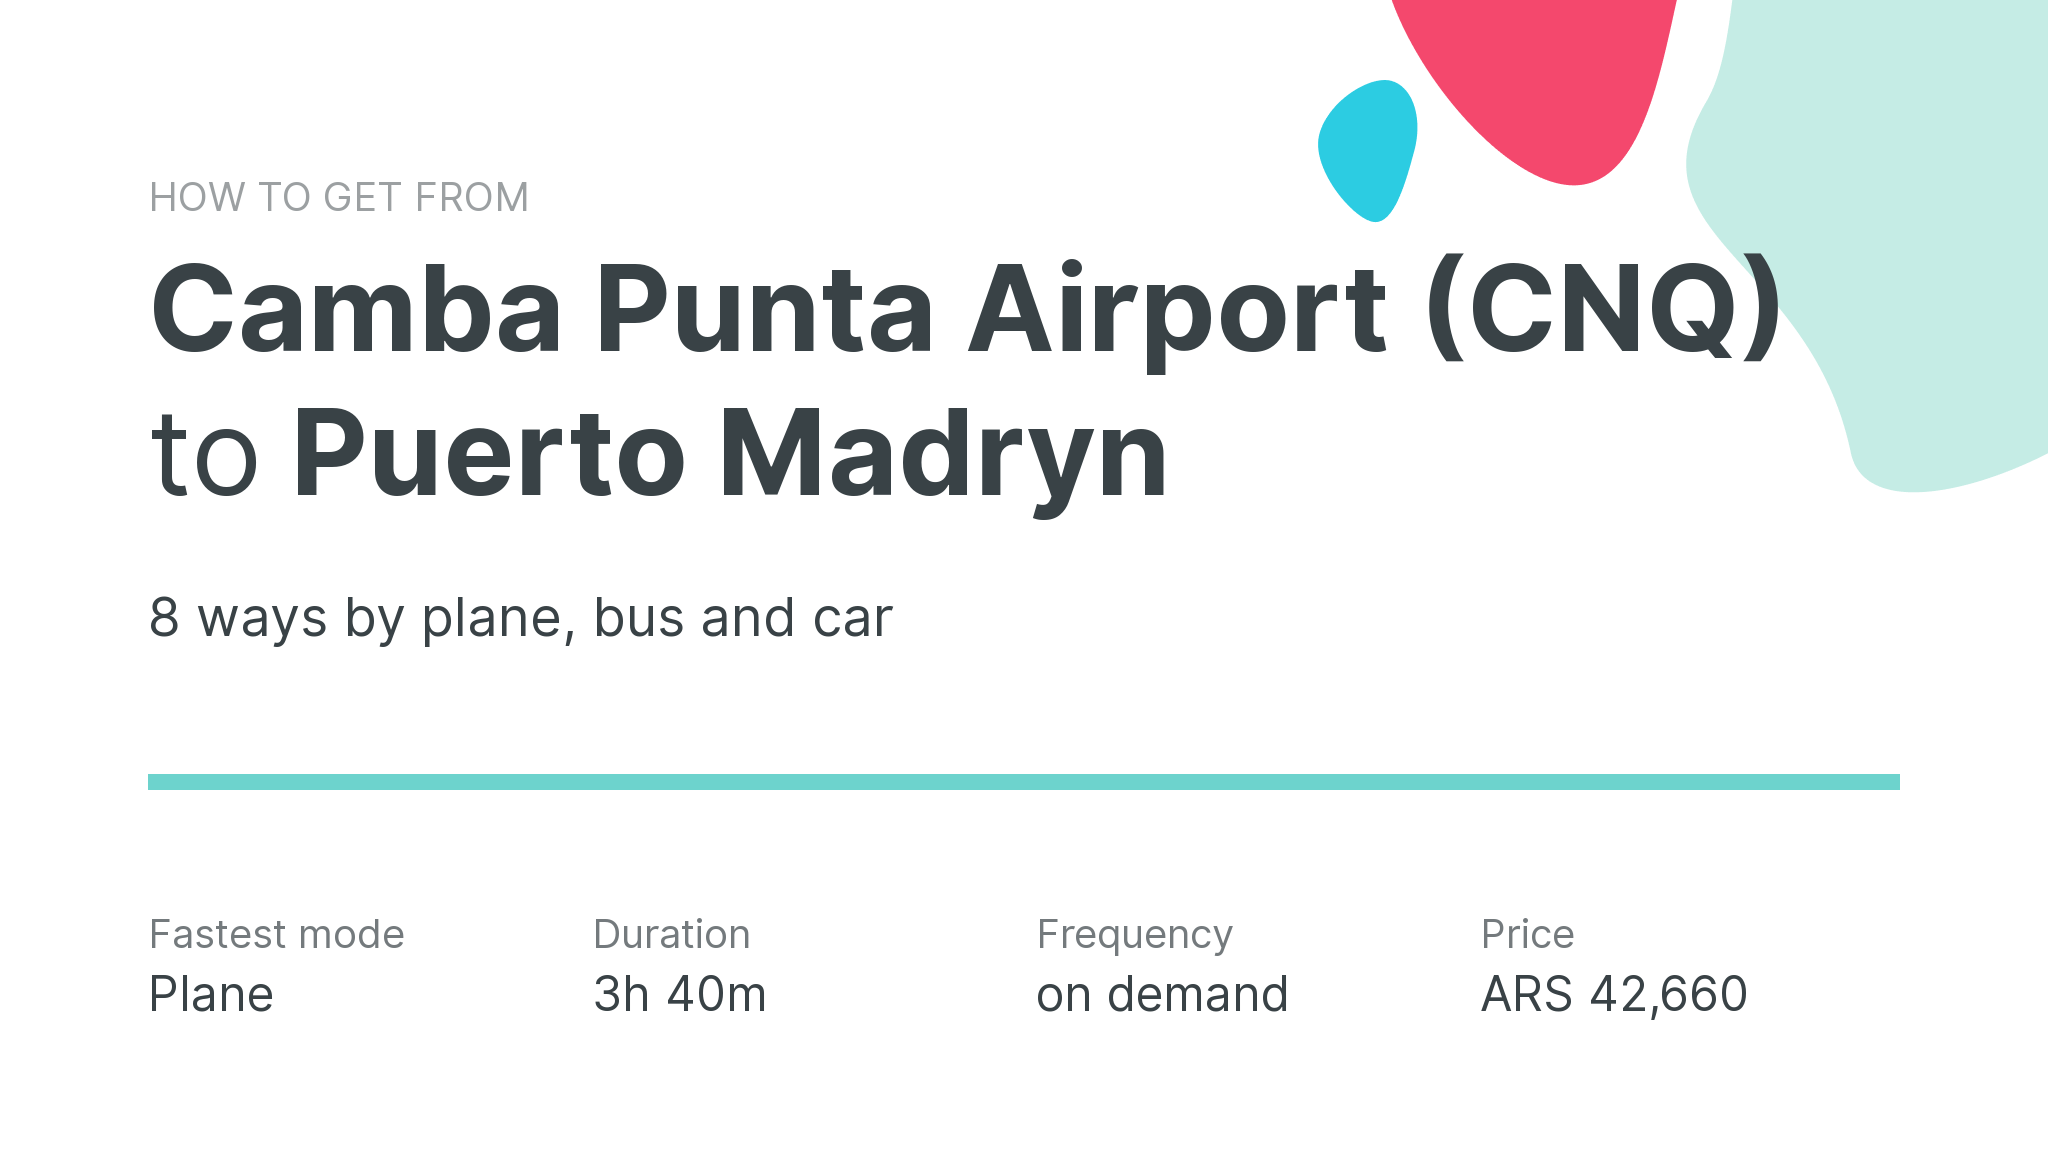 How do I get from Camba Punta Airport (CNQ) to Puerto Madryn